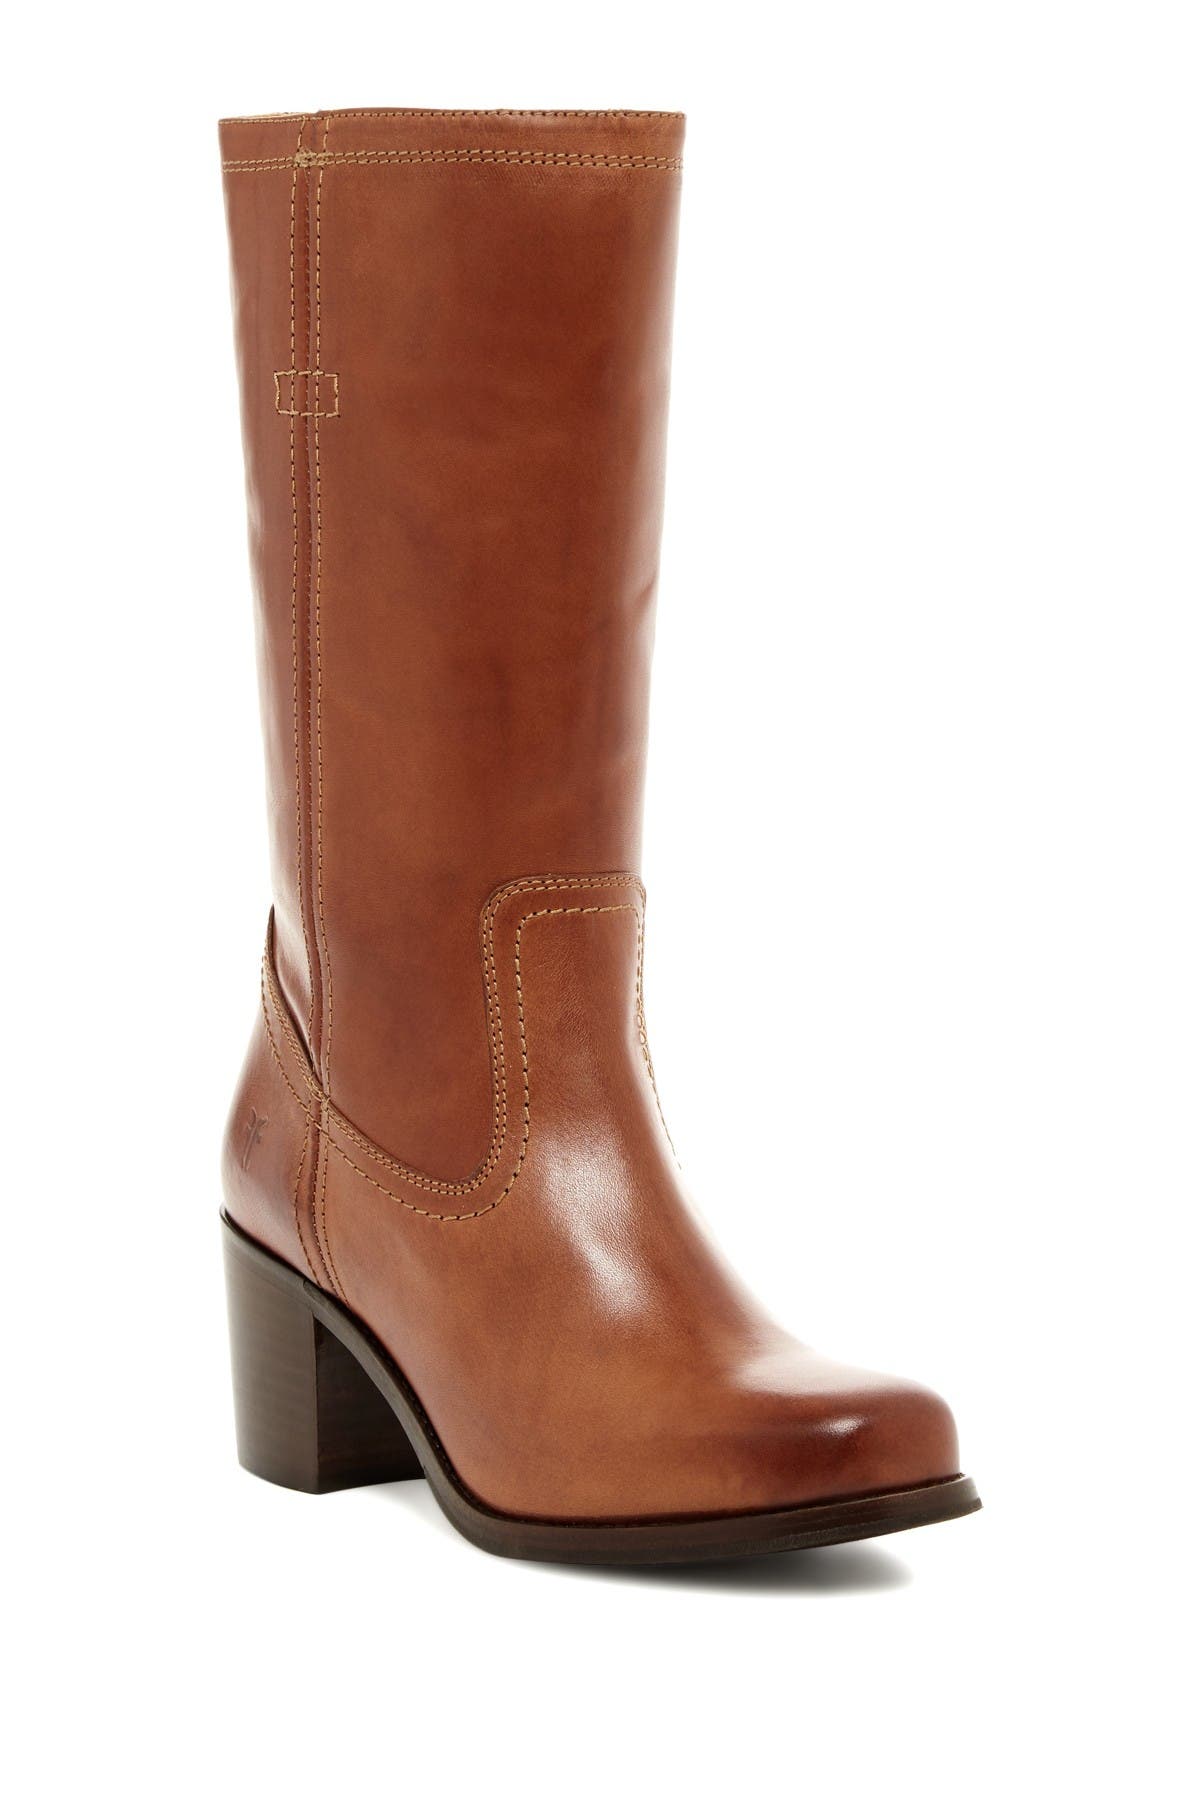 Frye | Kendall Pull-On Boot | Nordstrom 